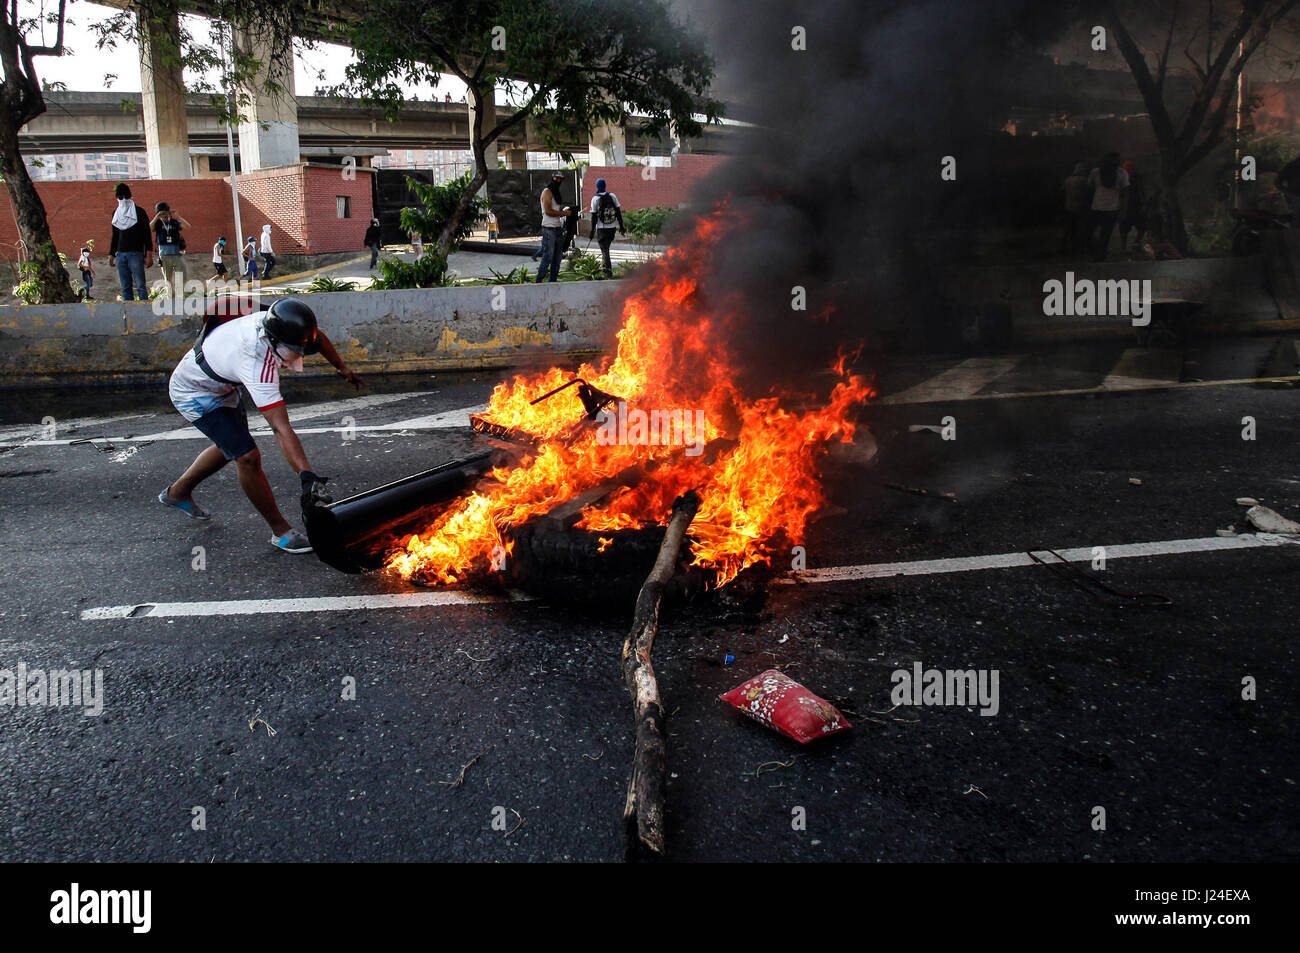 Caracas, Venezuela. 24th Apr, 2017. Demonstrators put a barricade during a protest in Caracas, Venezuela, on April 24, 2017. Venezuelan Foreign Minister Delcy Rodriguez on Saturday called for "true and accessible" global media coverage of the recent situation in the country. Since April 1, Venezuela has seen intense protests by both government and opposition supporters in Caracas and across the country, which have claimed at least 15 lives. Credit: Boris Vergara/Xinhua/Alamy Live News Stock Photo